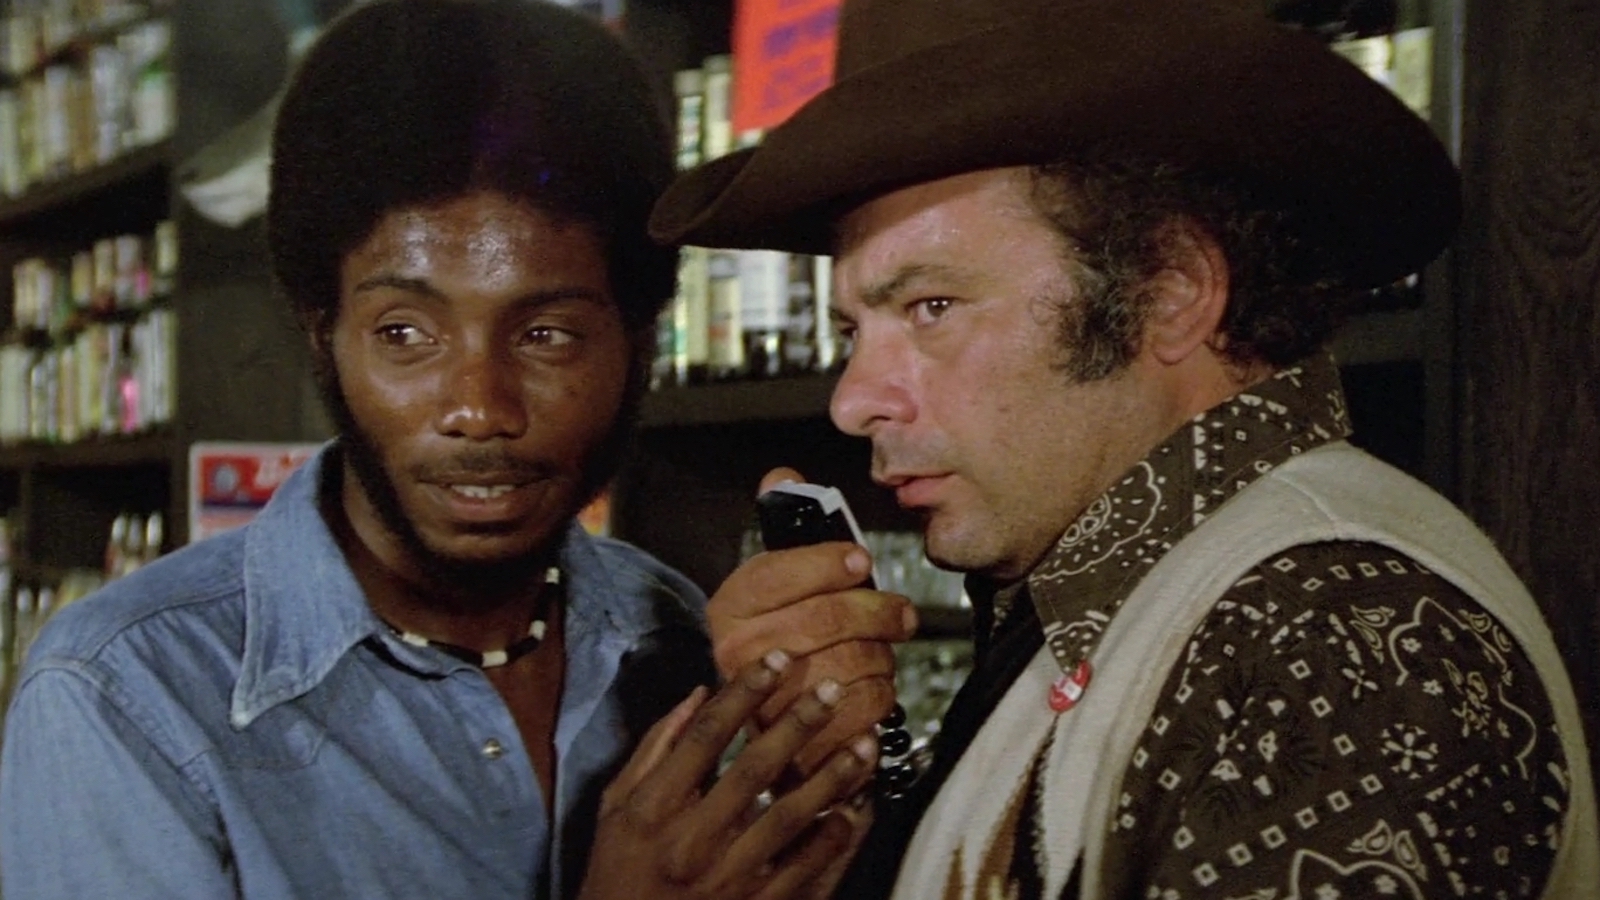 Two men stand in a liquor store, one holding a CB radio to his mouth and wearing a cowboy hat; both men look off screen with serious expressions